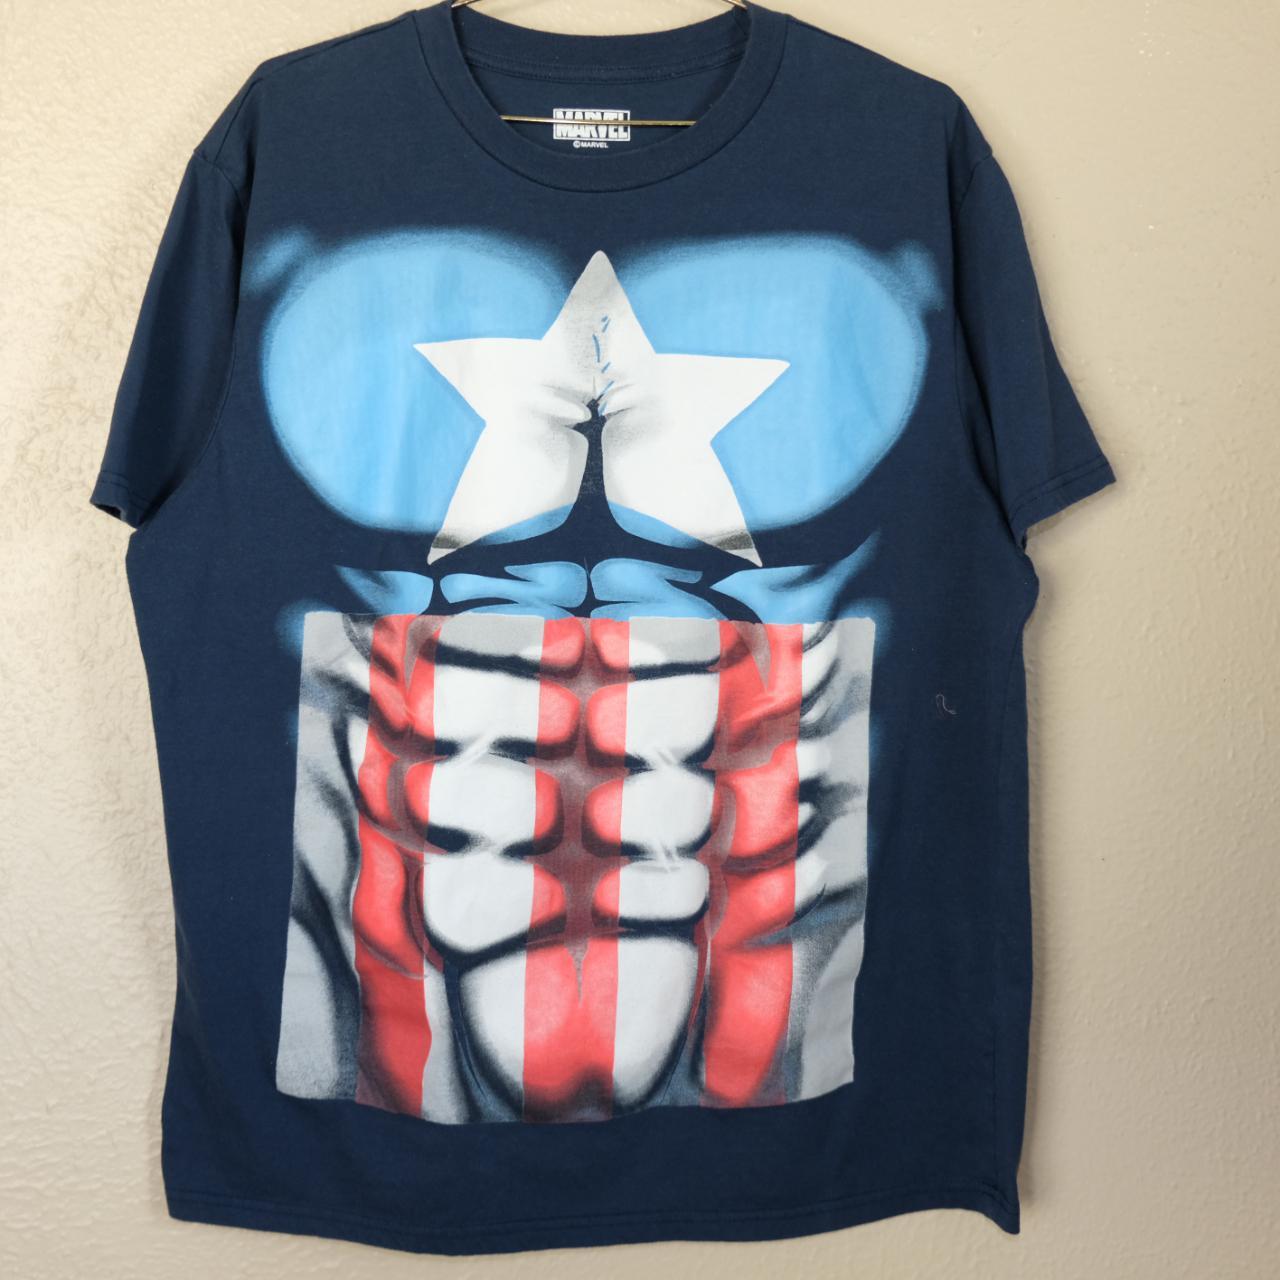 Product Image 1 - Pre-Loved Marvel Captain America Tee

Tag